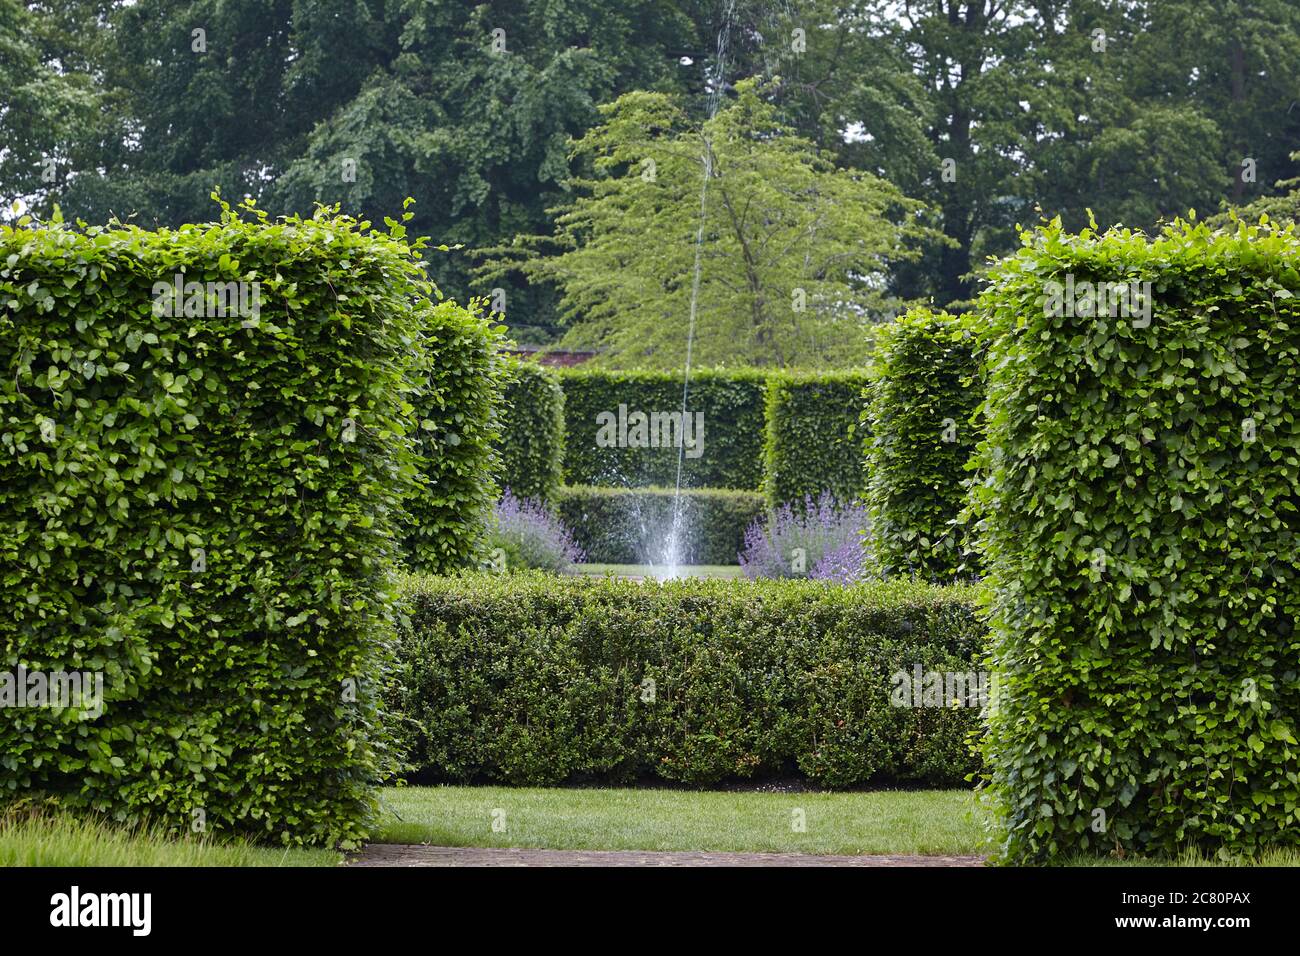 View of the Central Fountain and beech hedges at Scampston Hall walled garden designed by the dutch landscape garden architect Piet Oudolf Stock Photo